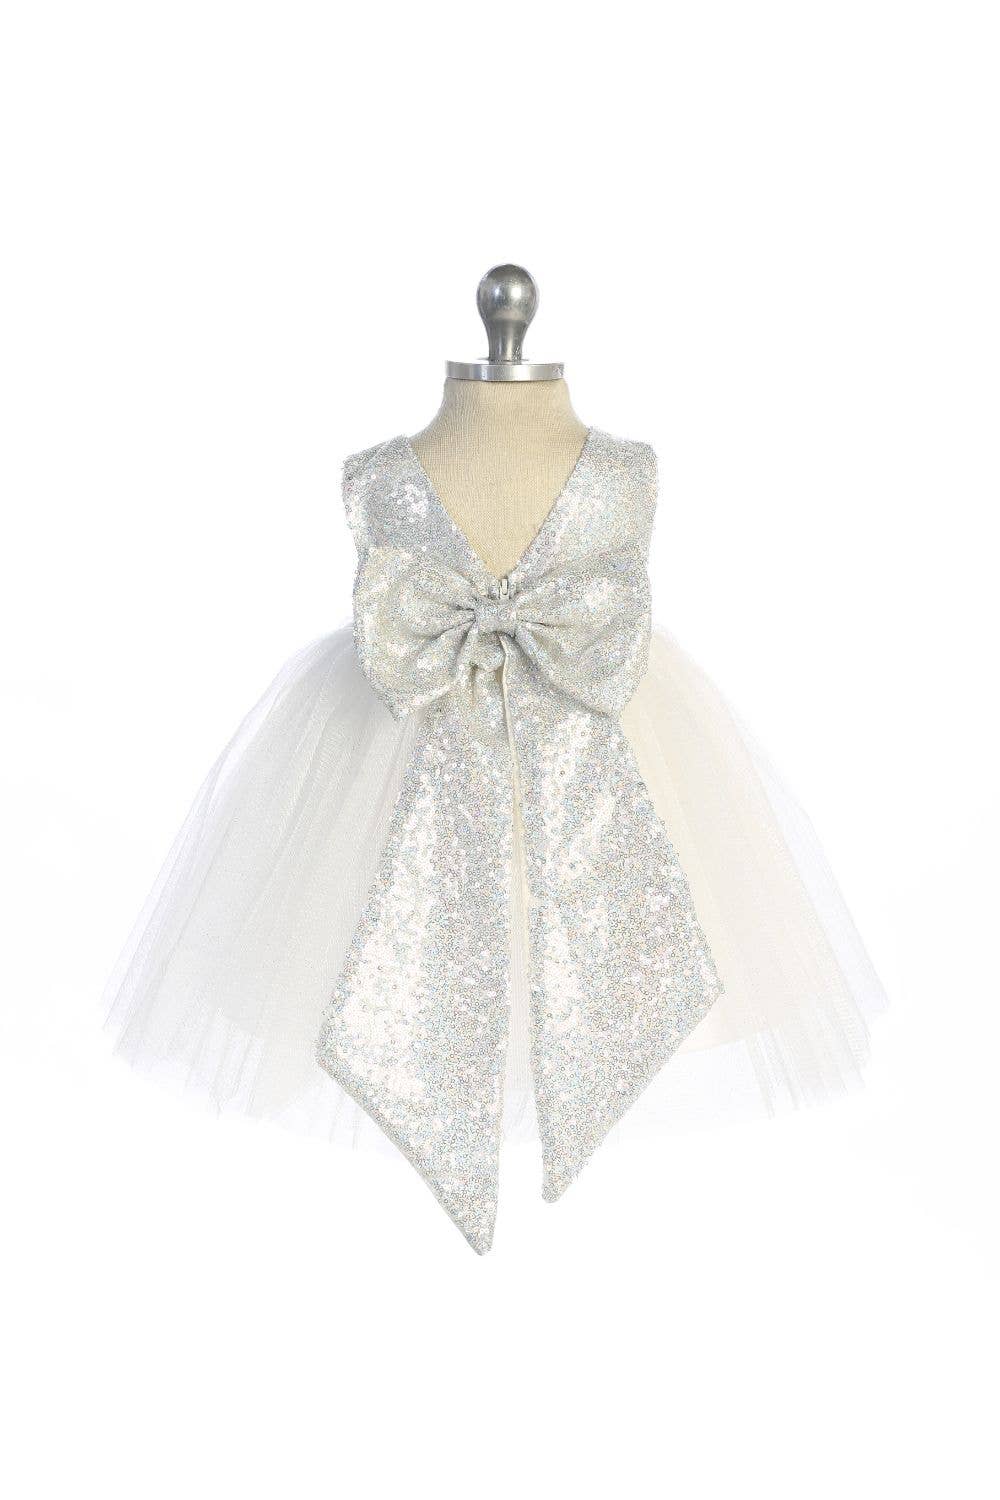 Ivory/Silver Sequins V Back & Bow Baby Dress